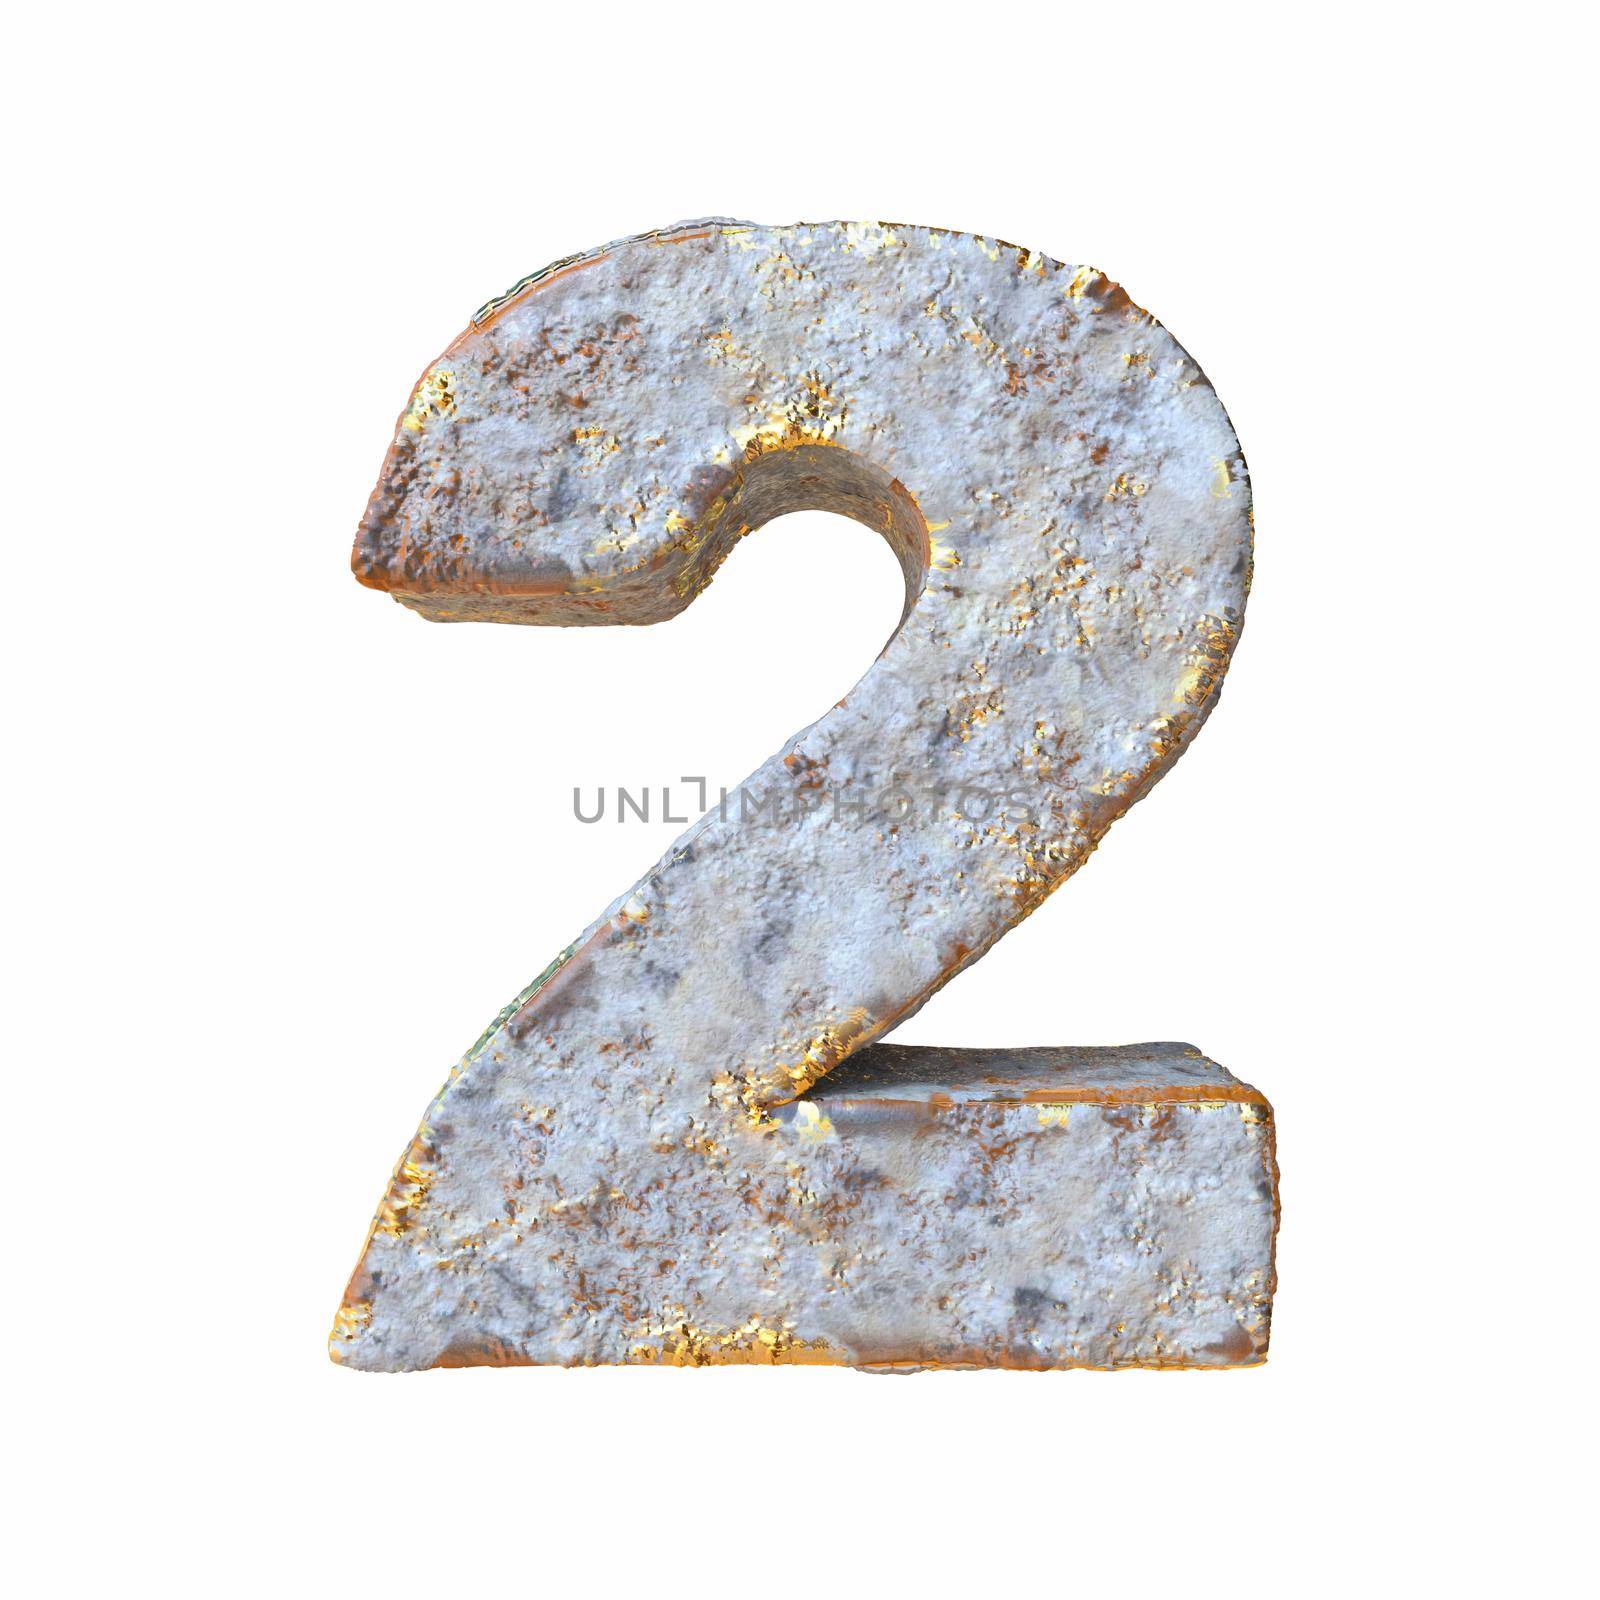 Stone with golden metal particles Number 2 TWO 3D rendering illustration isolated on white background